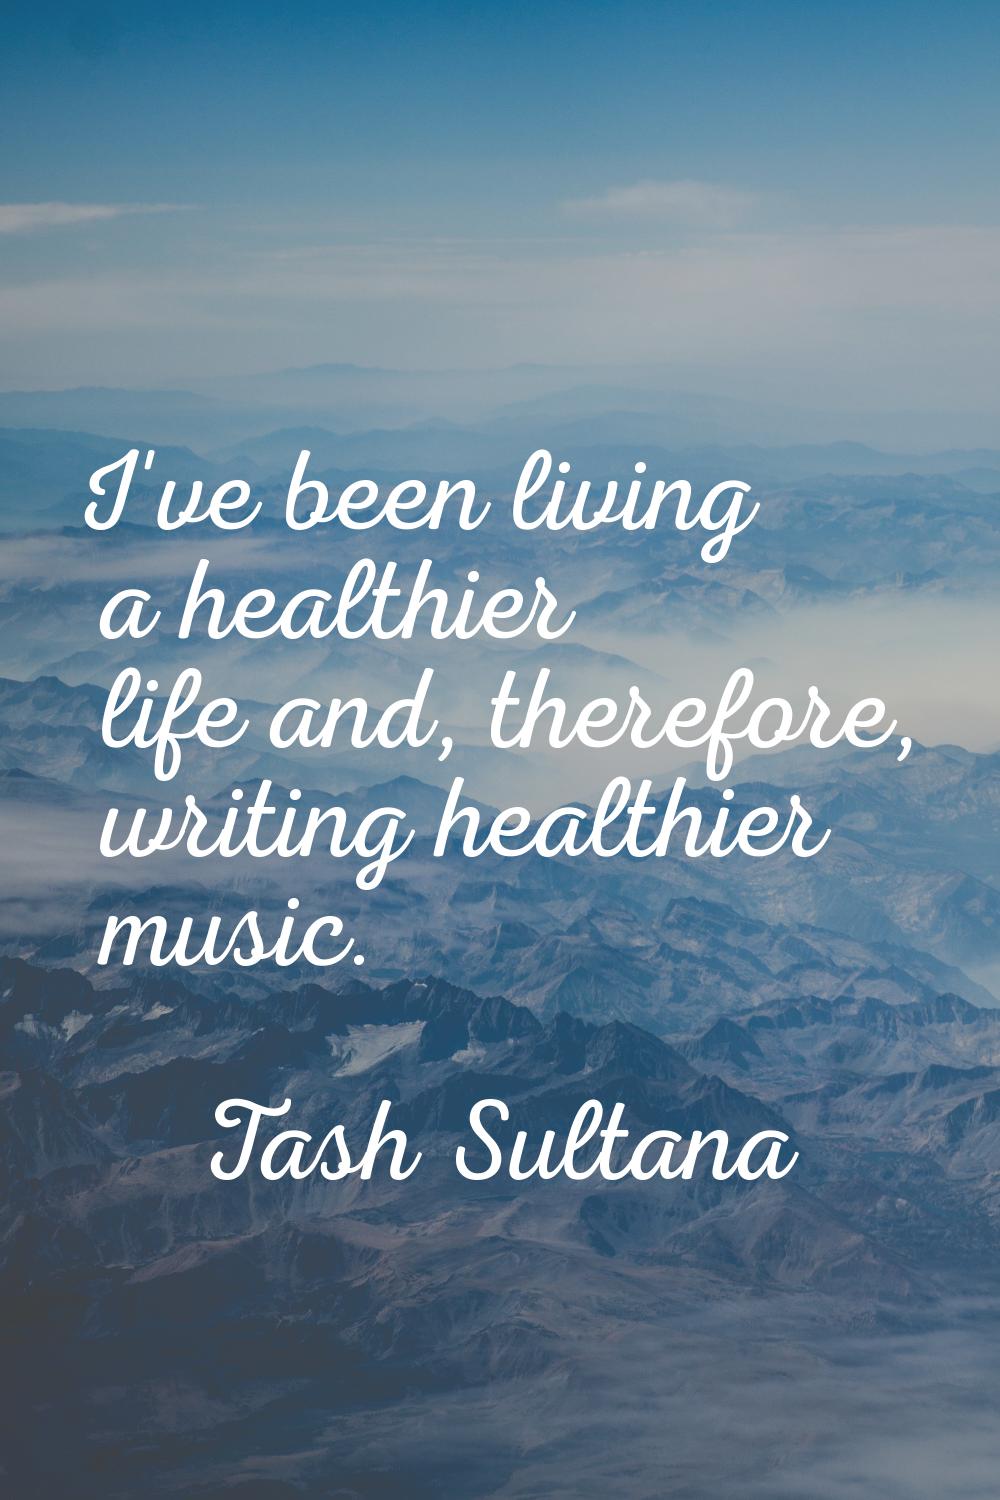 I've been living a healthier life and, therefore, writing healthier music.